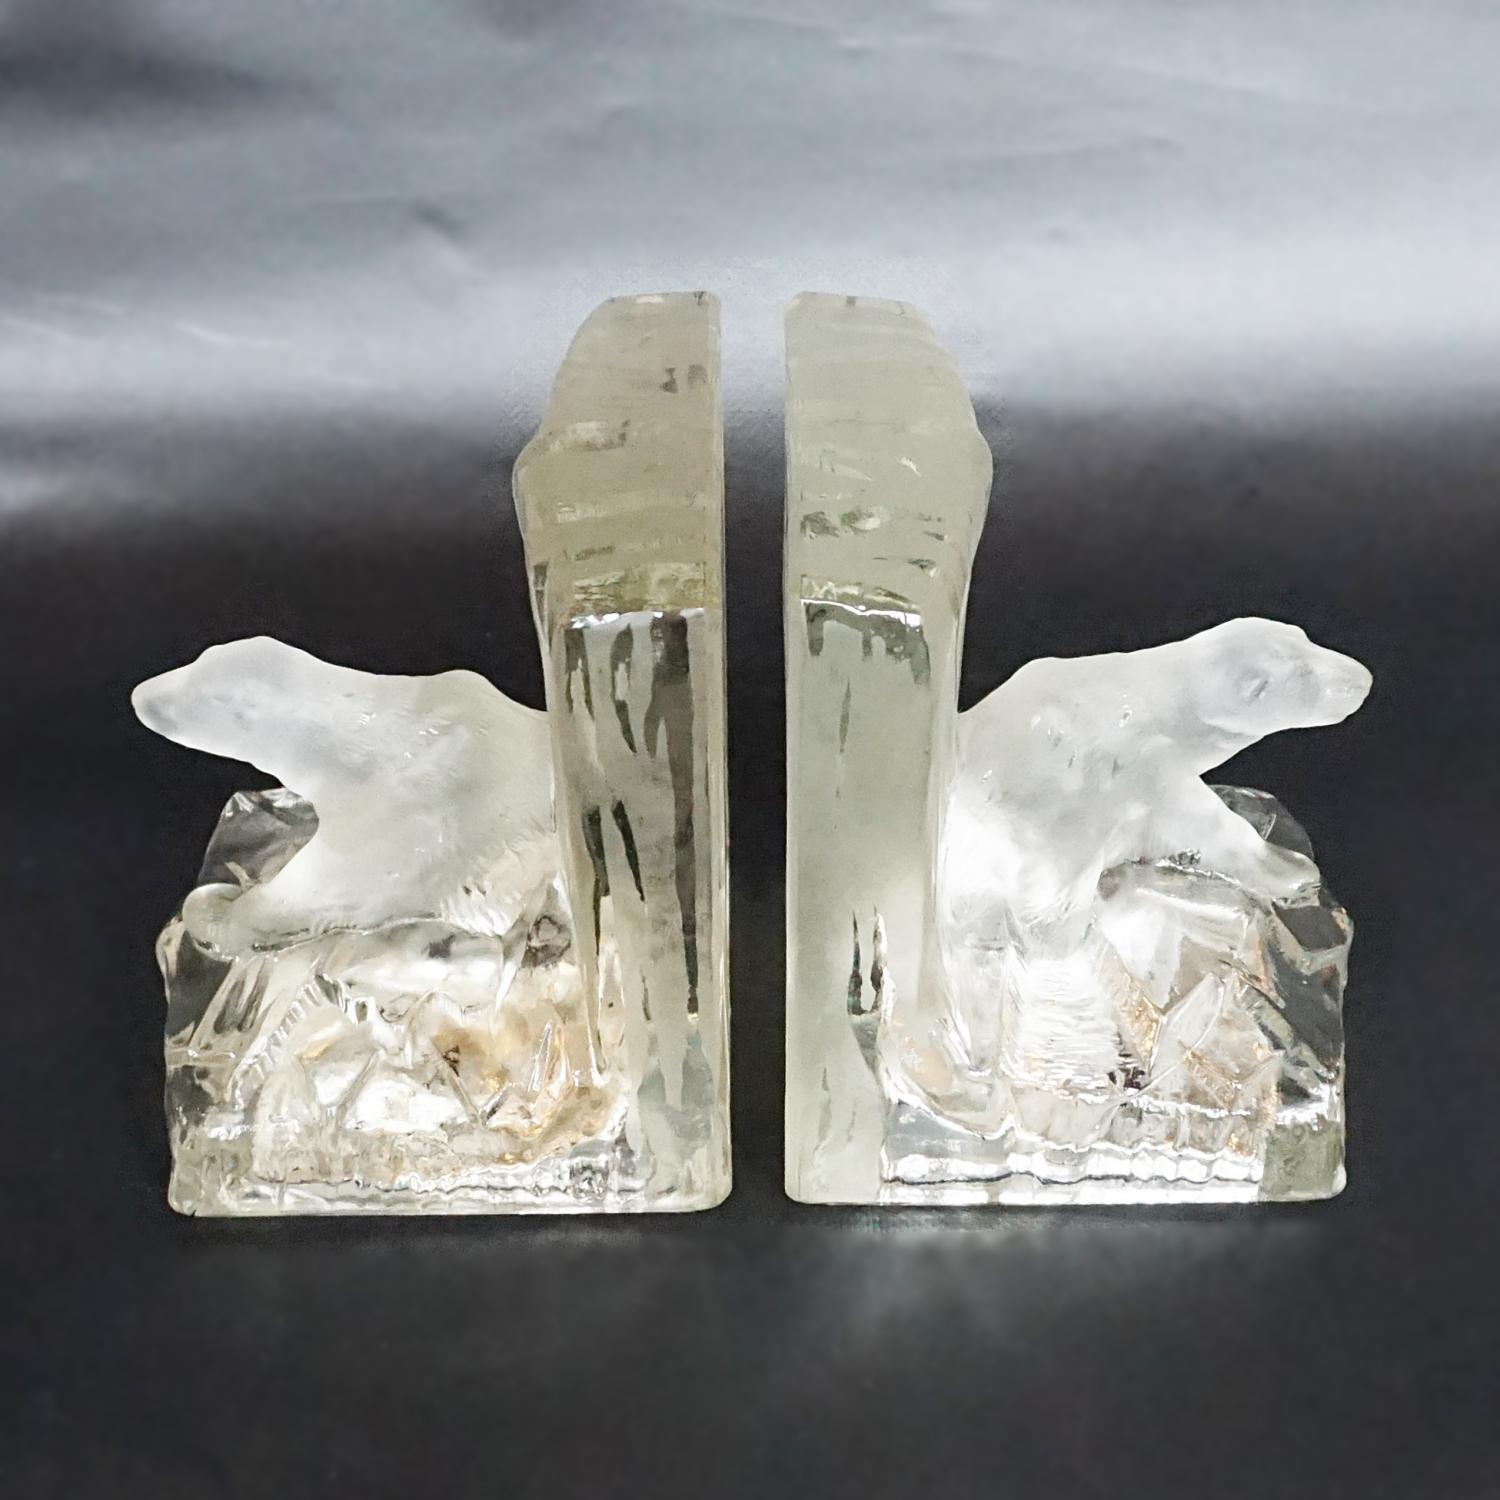 A Pair of acid finish glass Polar Bear bookends by Hailwood and Ackroyd. Iceberg backed with the polar bears stepping onto an icy terrain. Stamped 'Hailware British Made' to back and numbered. 

Dimensions: H 16cm W 11.5cm D 11.5cm

Origin: